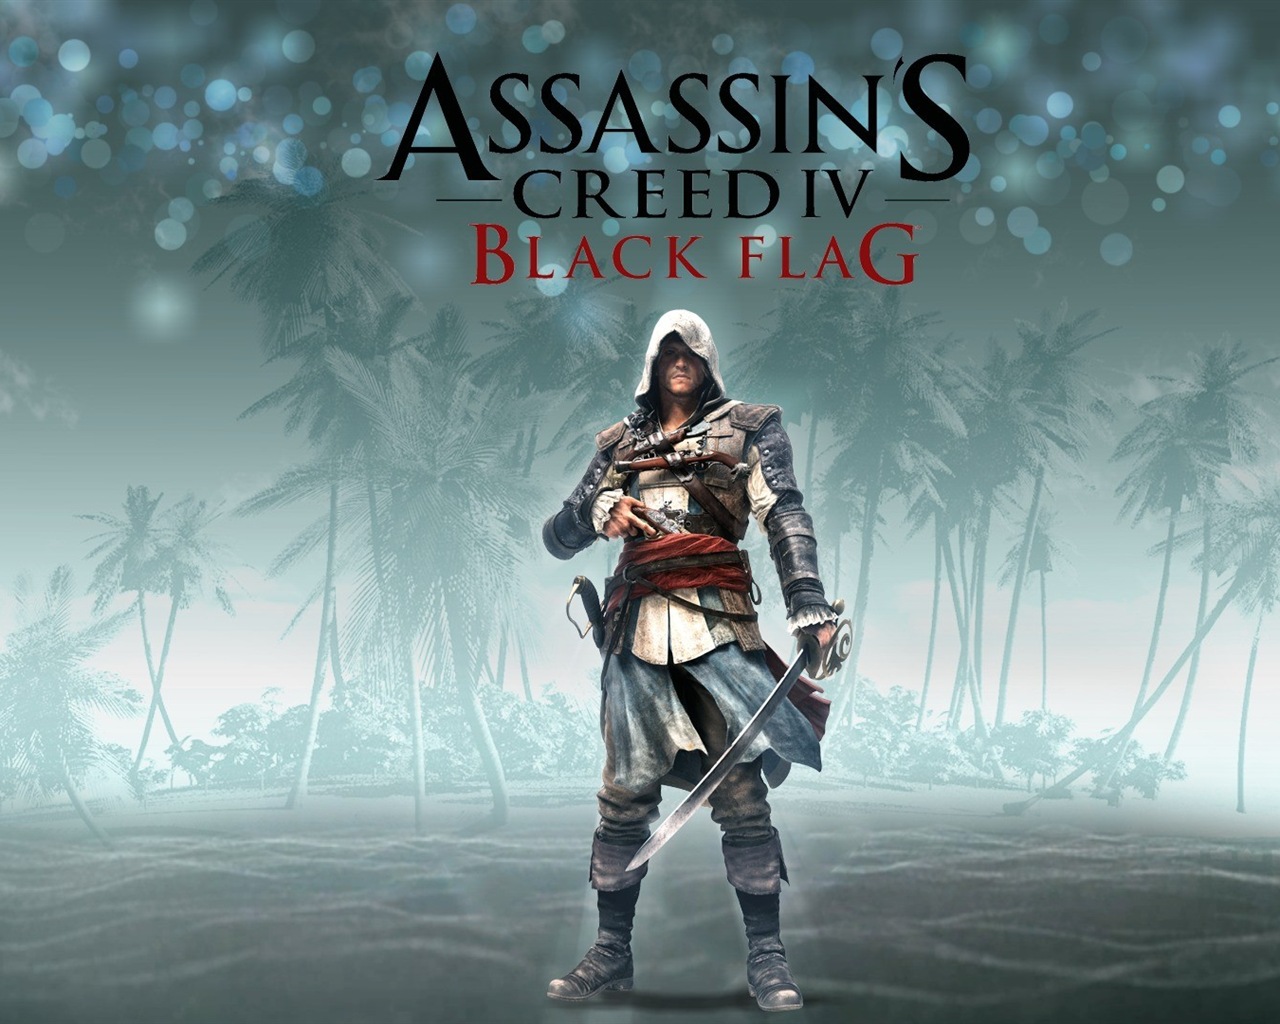 Creed IV Assassin: Black Flag HD wallpapers #14 - 1280x1024